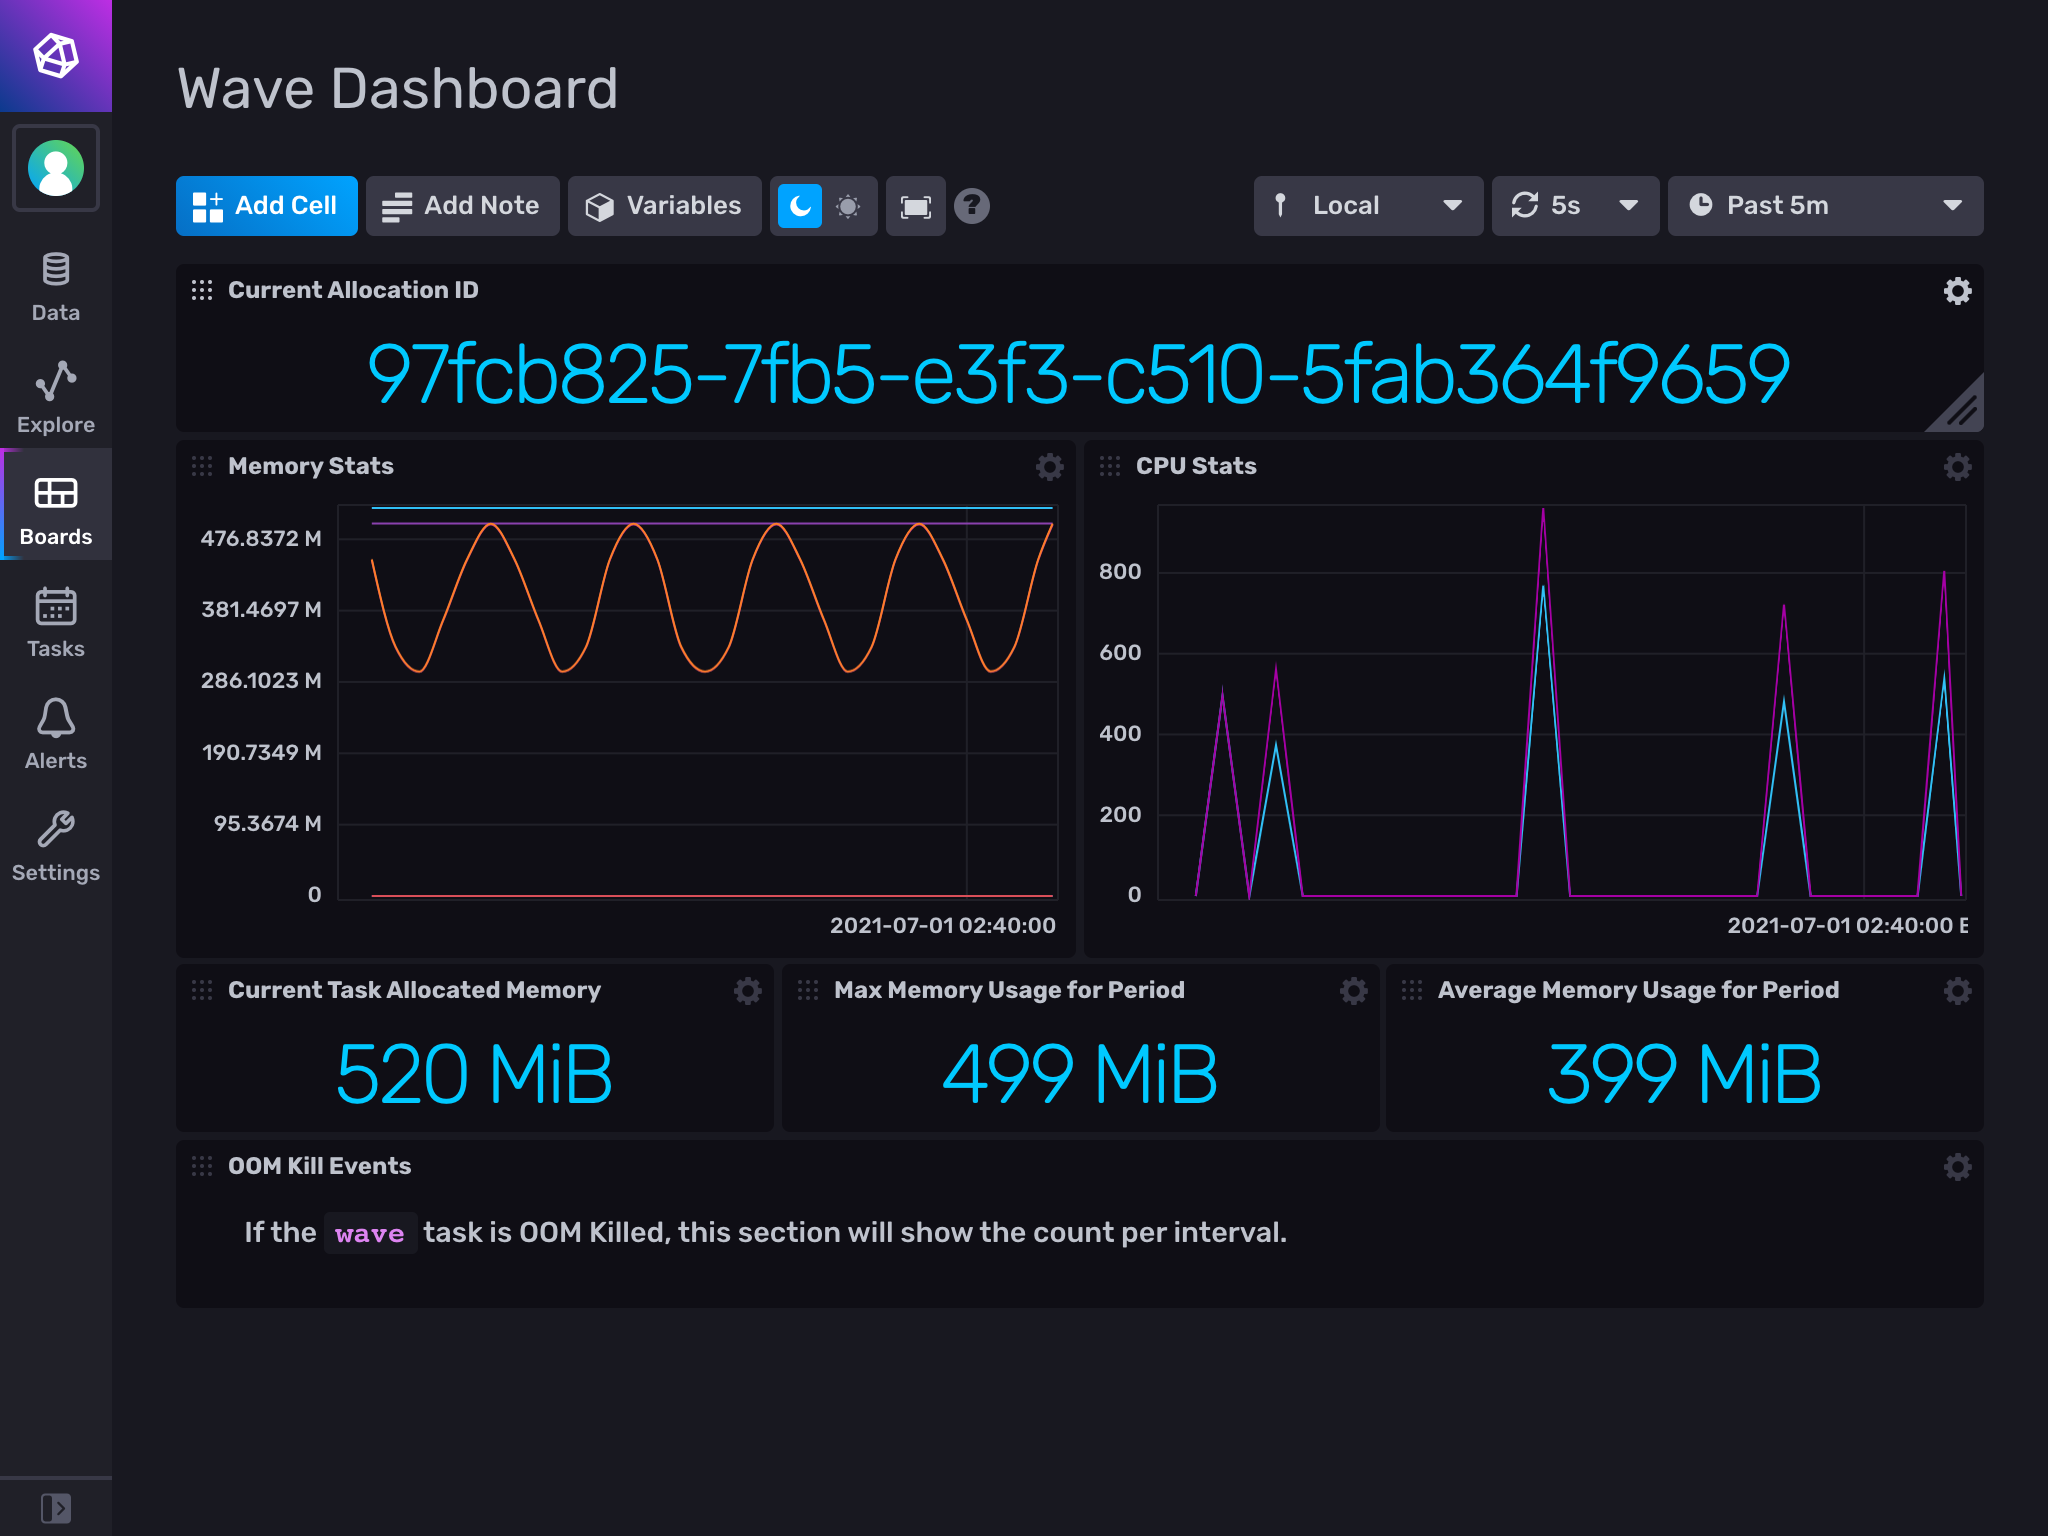 "Wave Dashboard" page showing sinusoidal memory usage in the "Memory Stats" cell